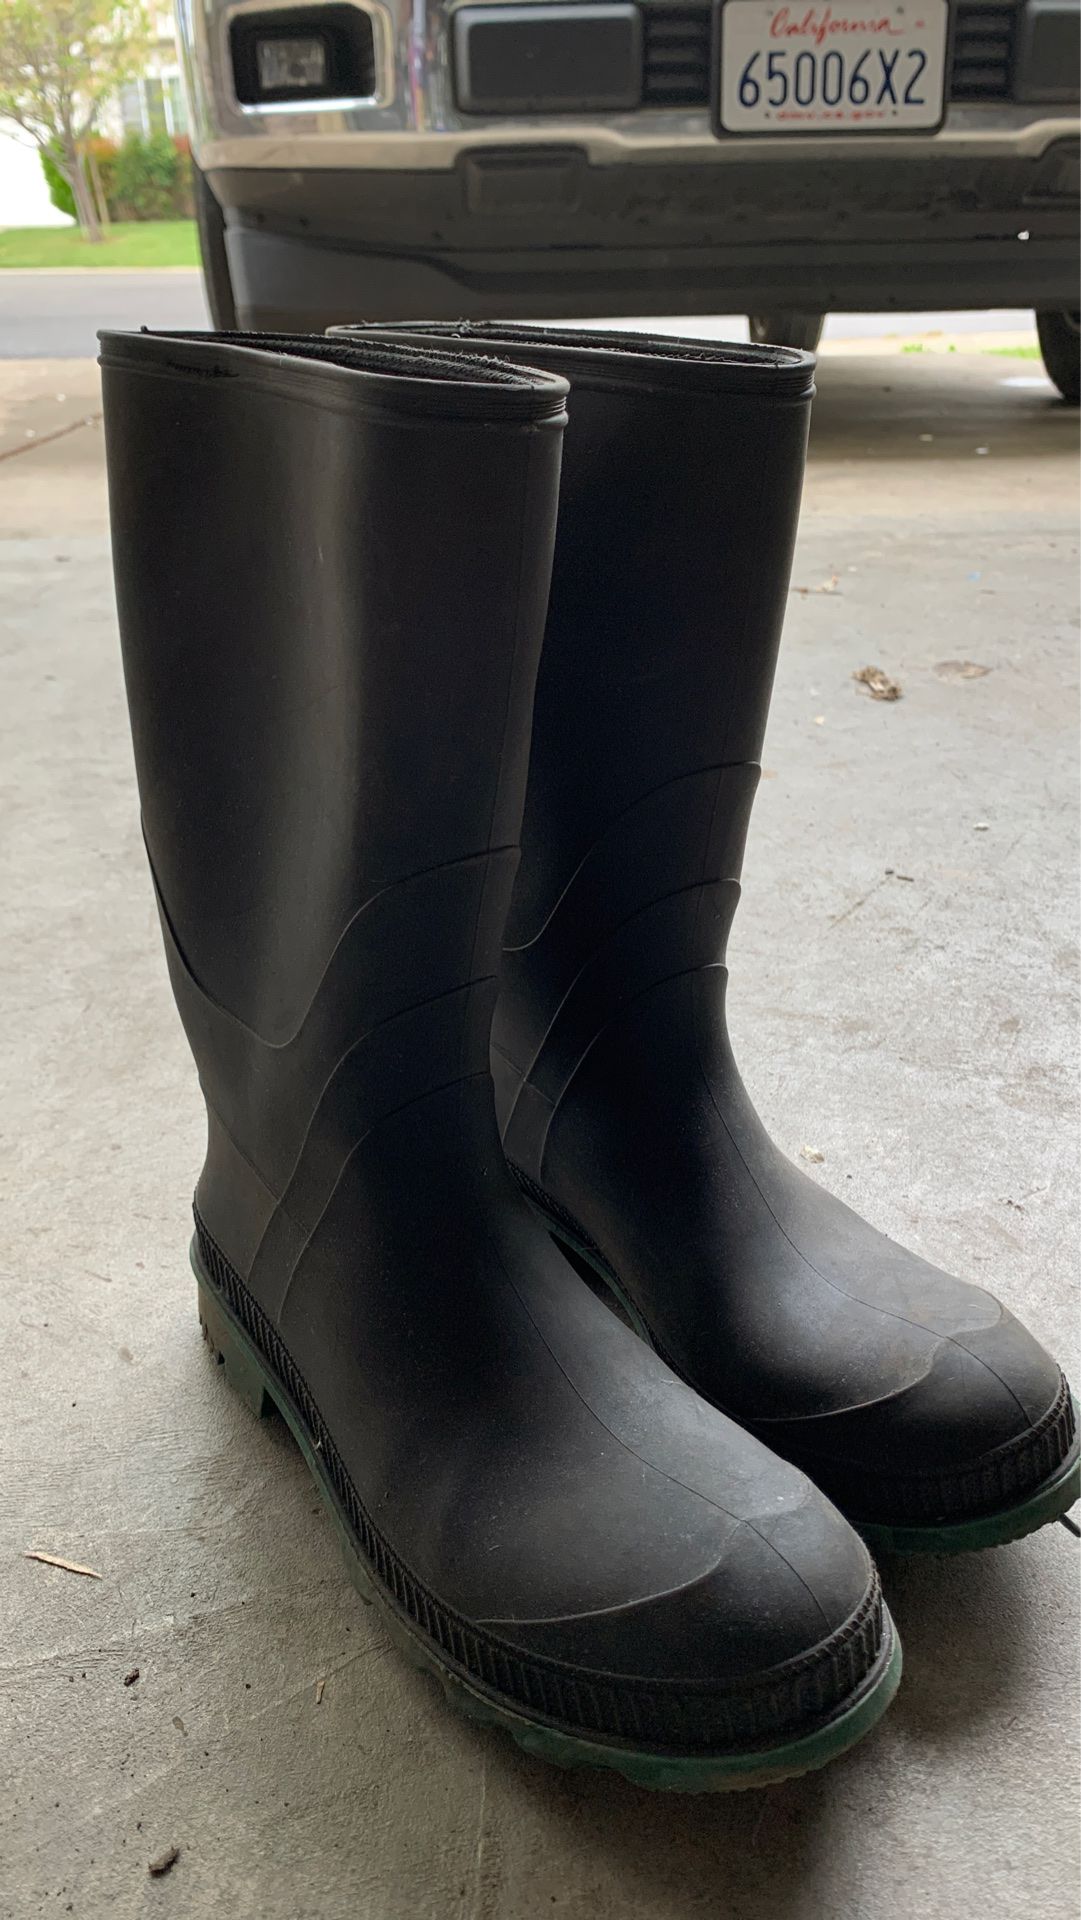 Rubber boots (size 10)